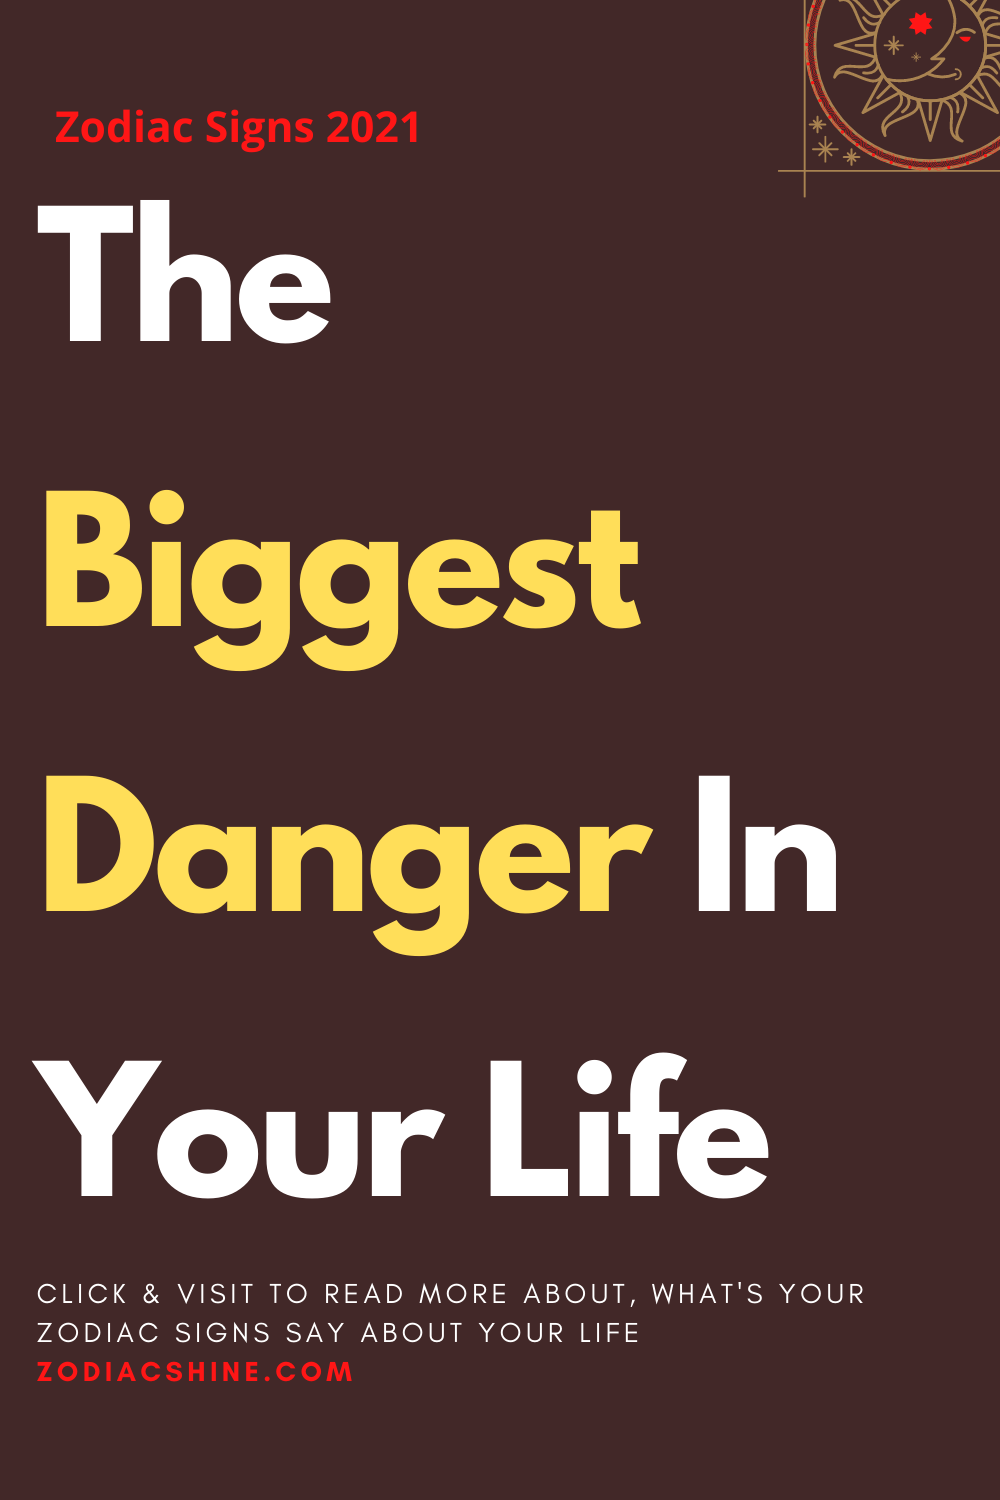 The Biggest Danger In Your Life